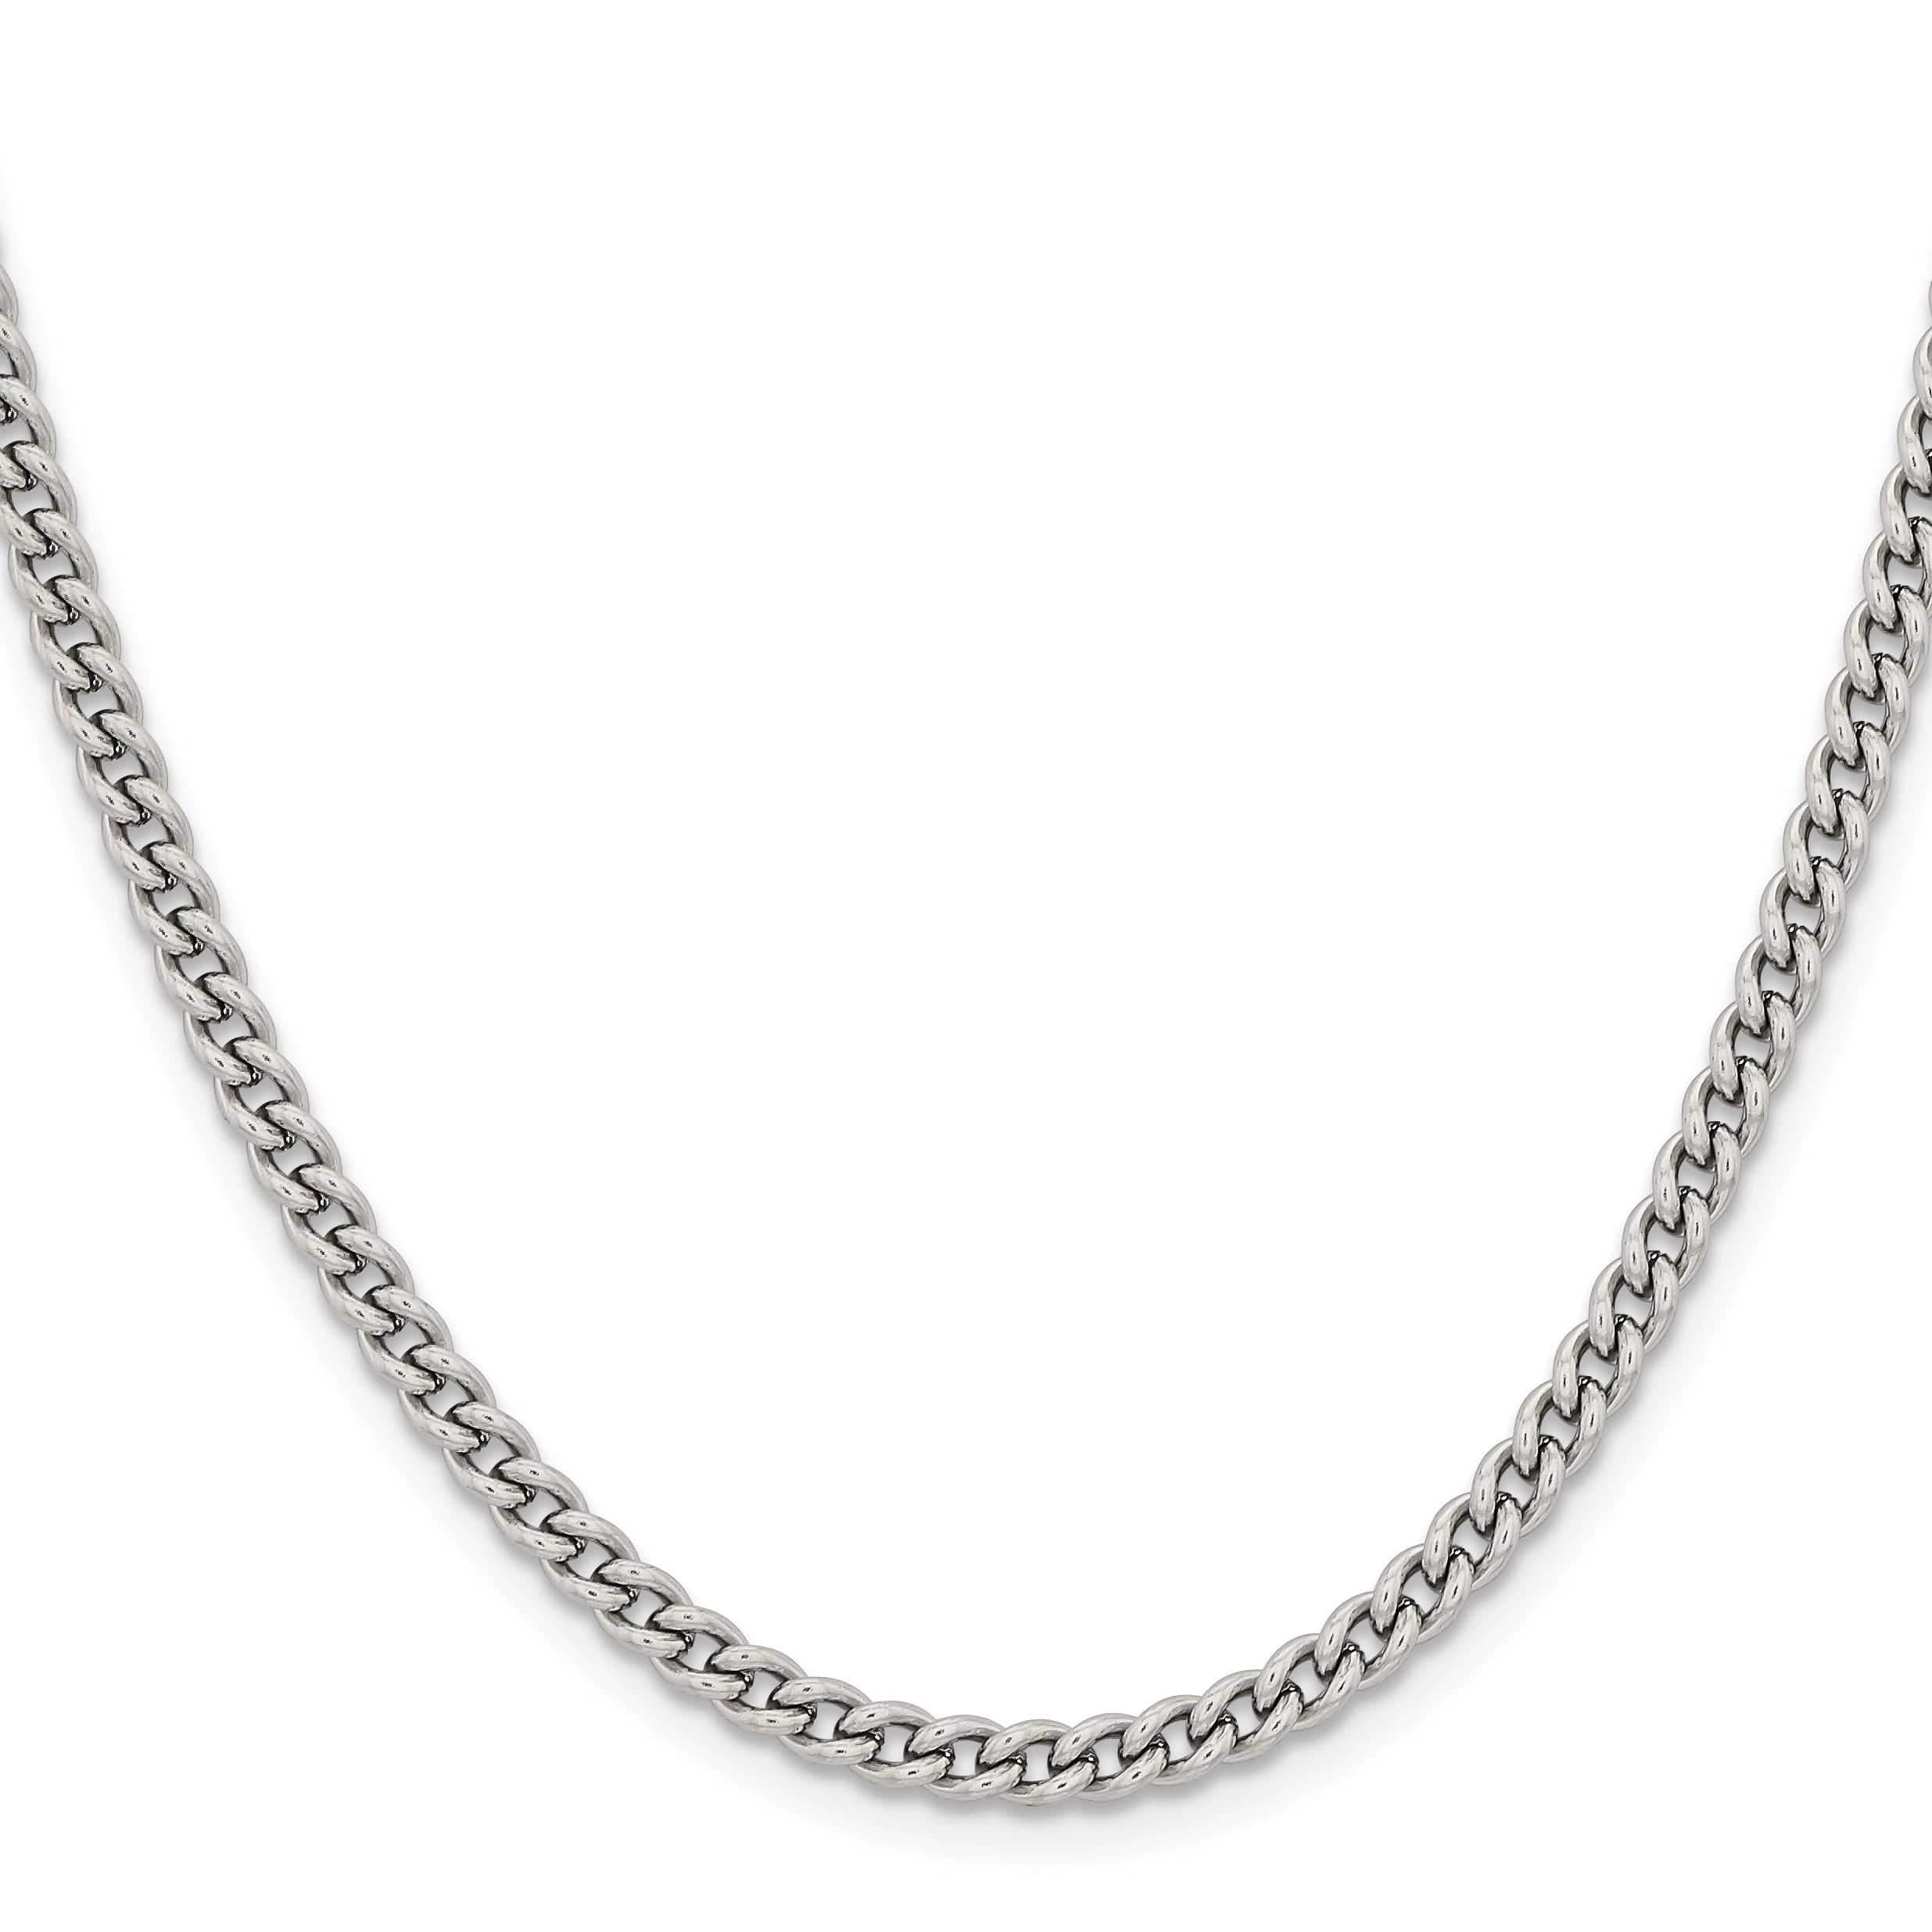 Chisel Stainless Steel Polished 4mm 18 inch Round Curb Chain